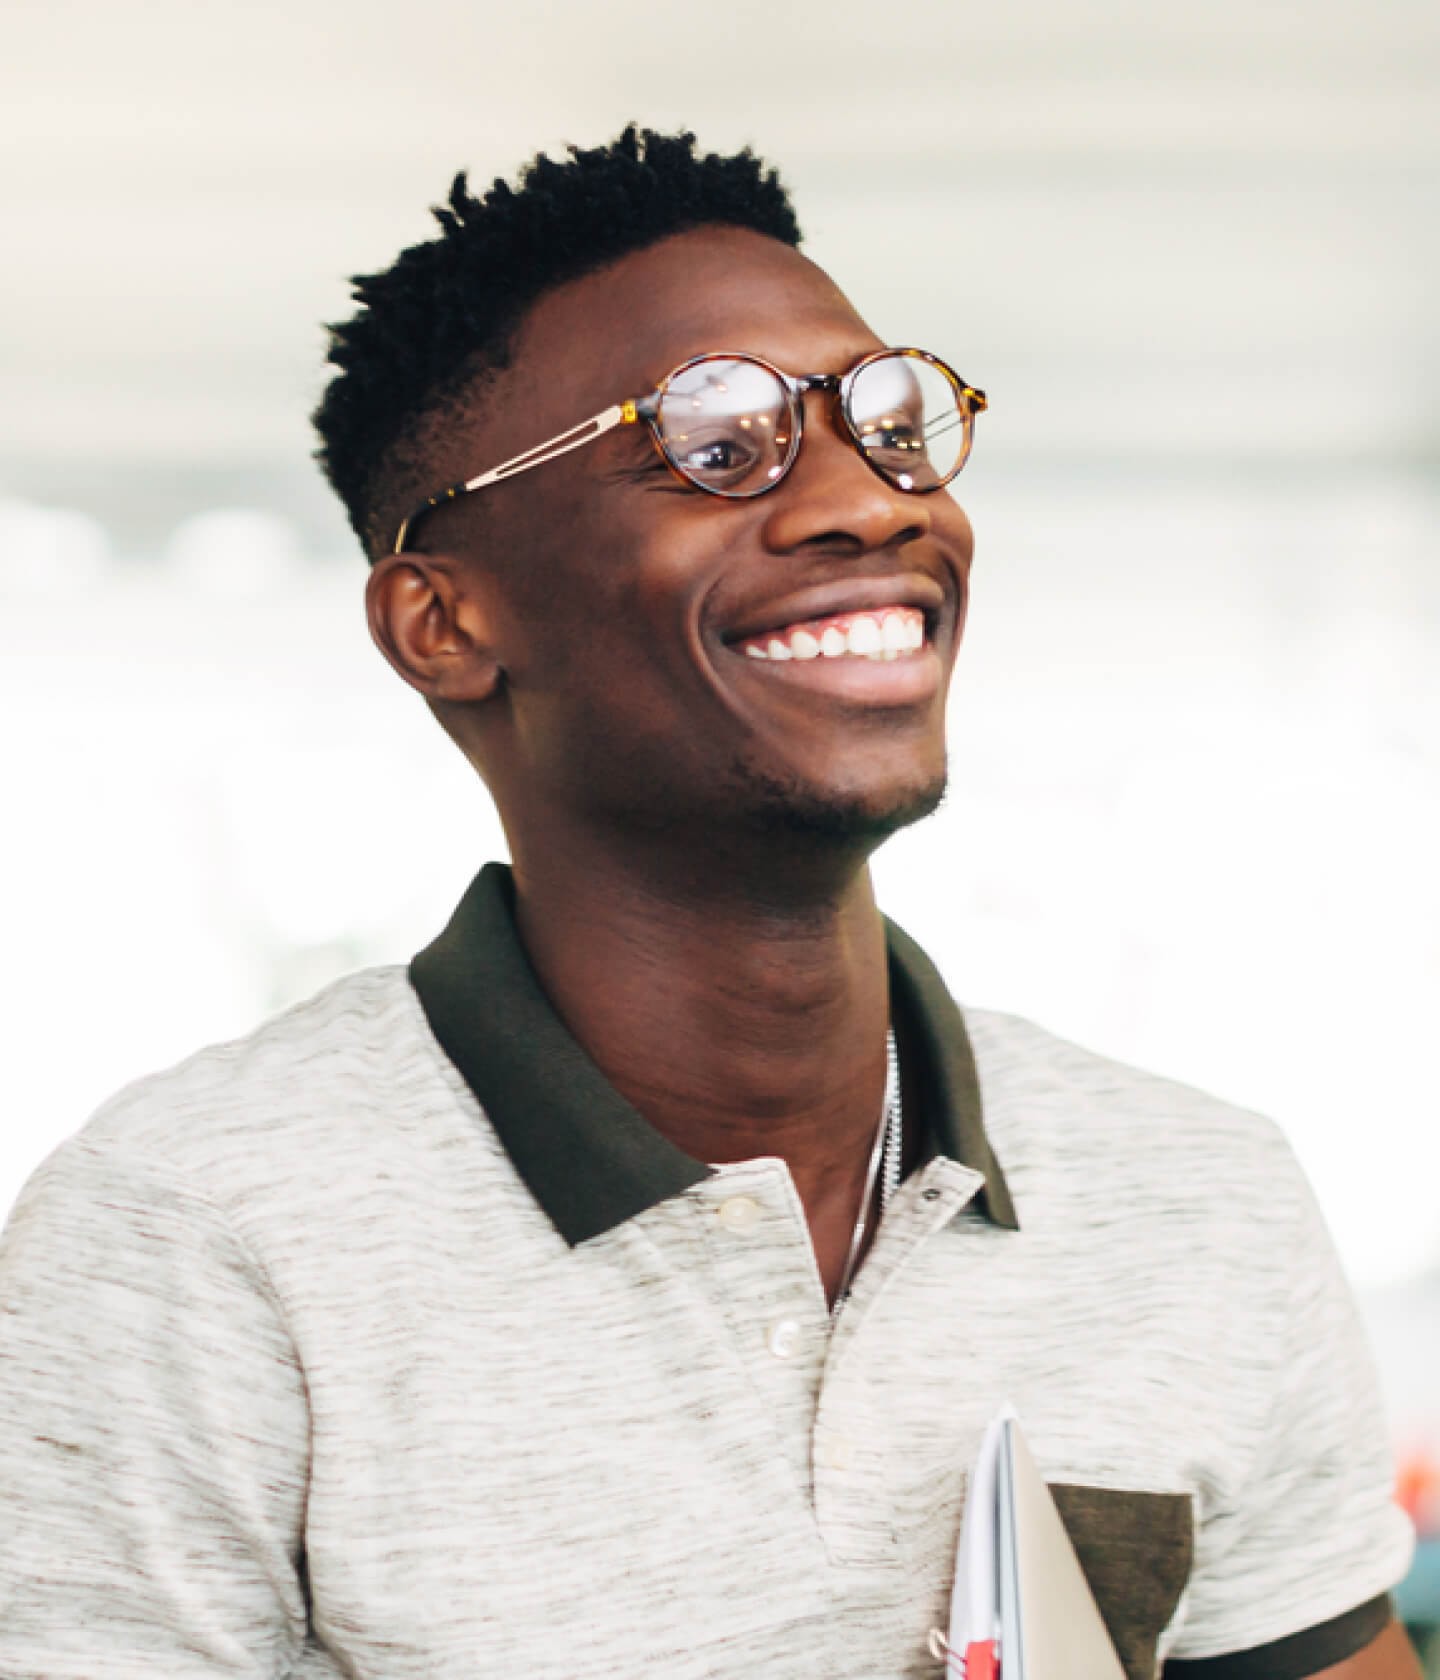 Photo of a young Black man with a big smile